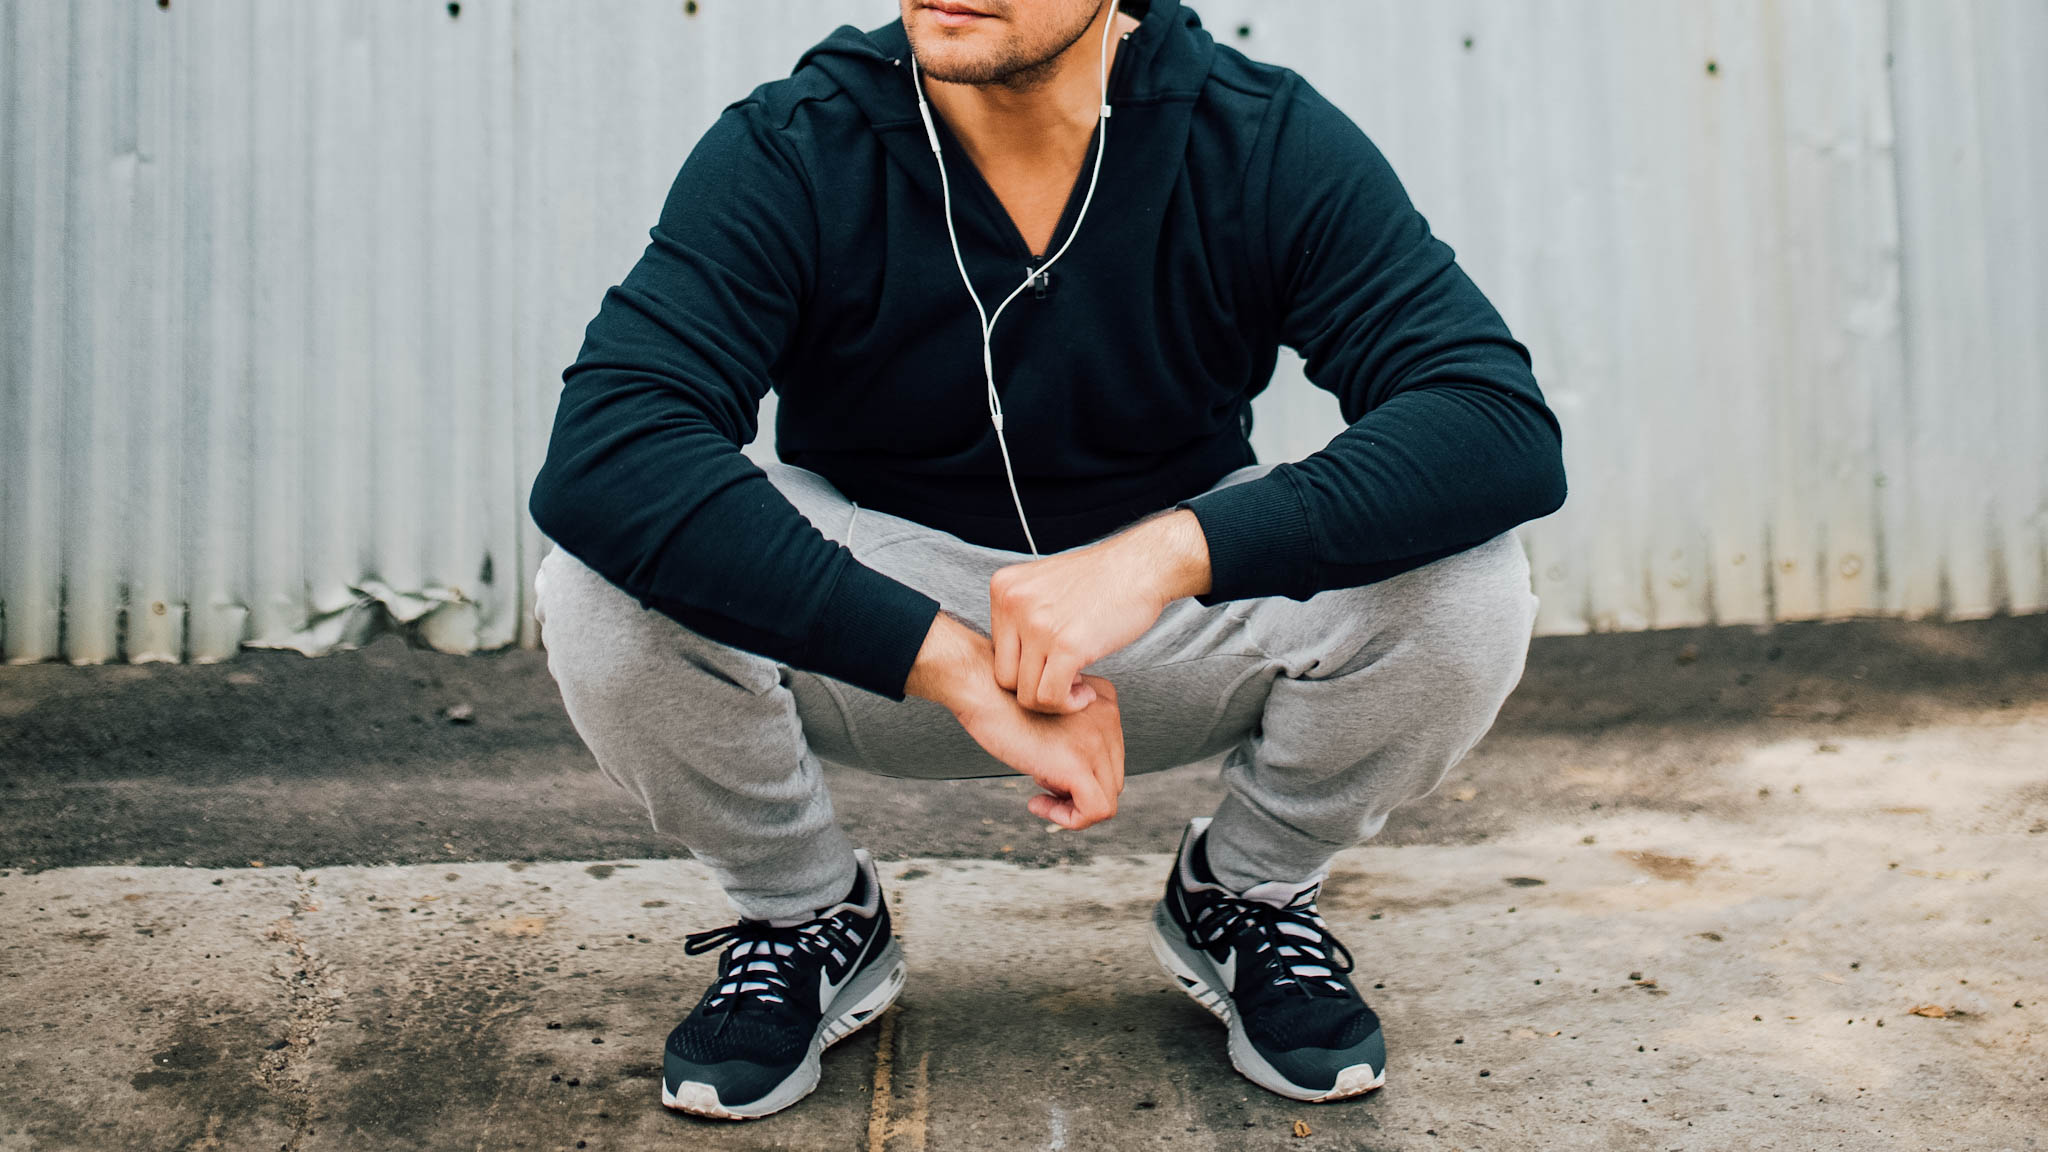 man in gym clothes squatting - man in running clothes - man wearing grey joggers - grey sweat pants - black hoodie